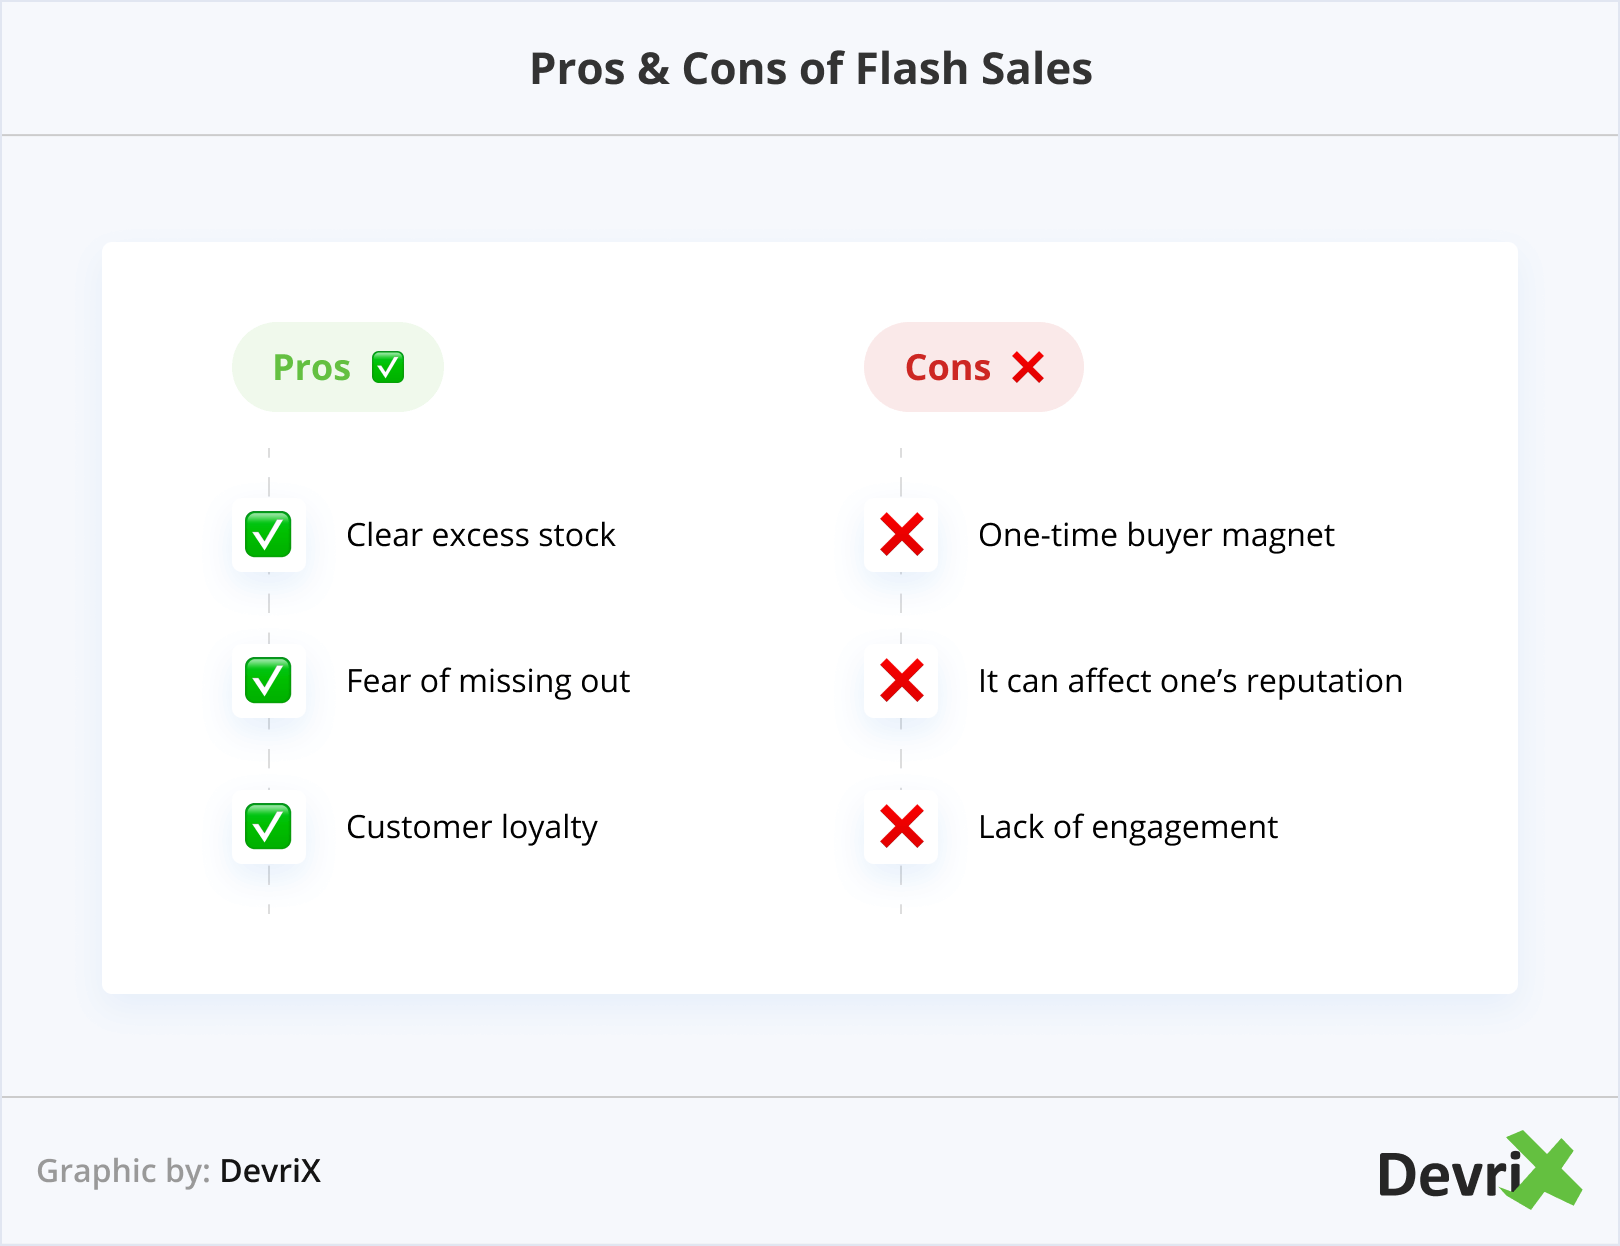 Pros & Cons of Flash Sales